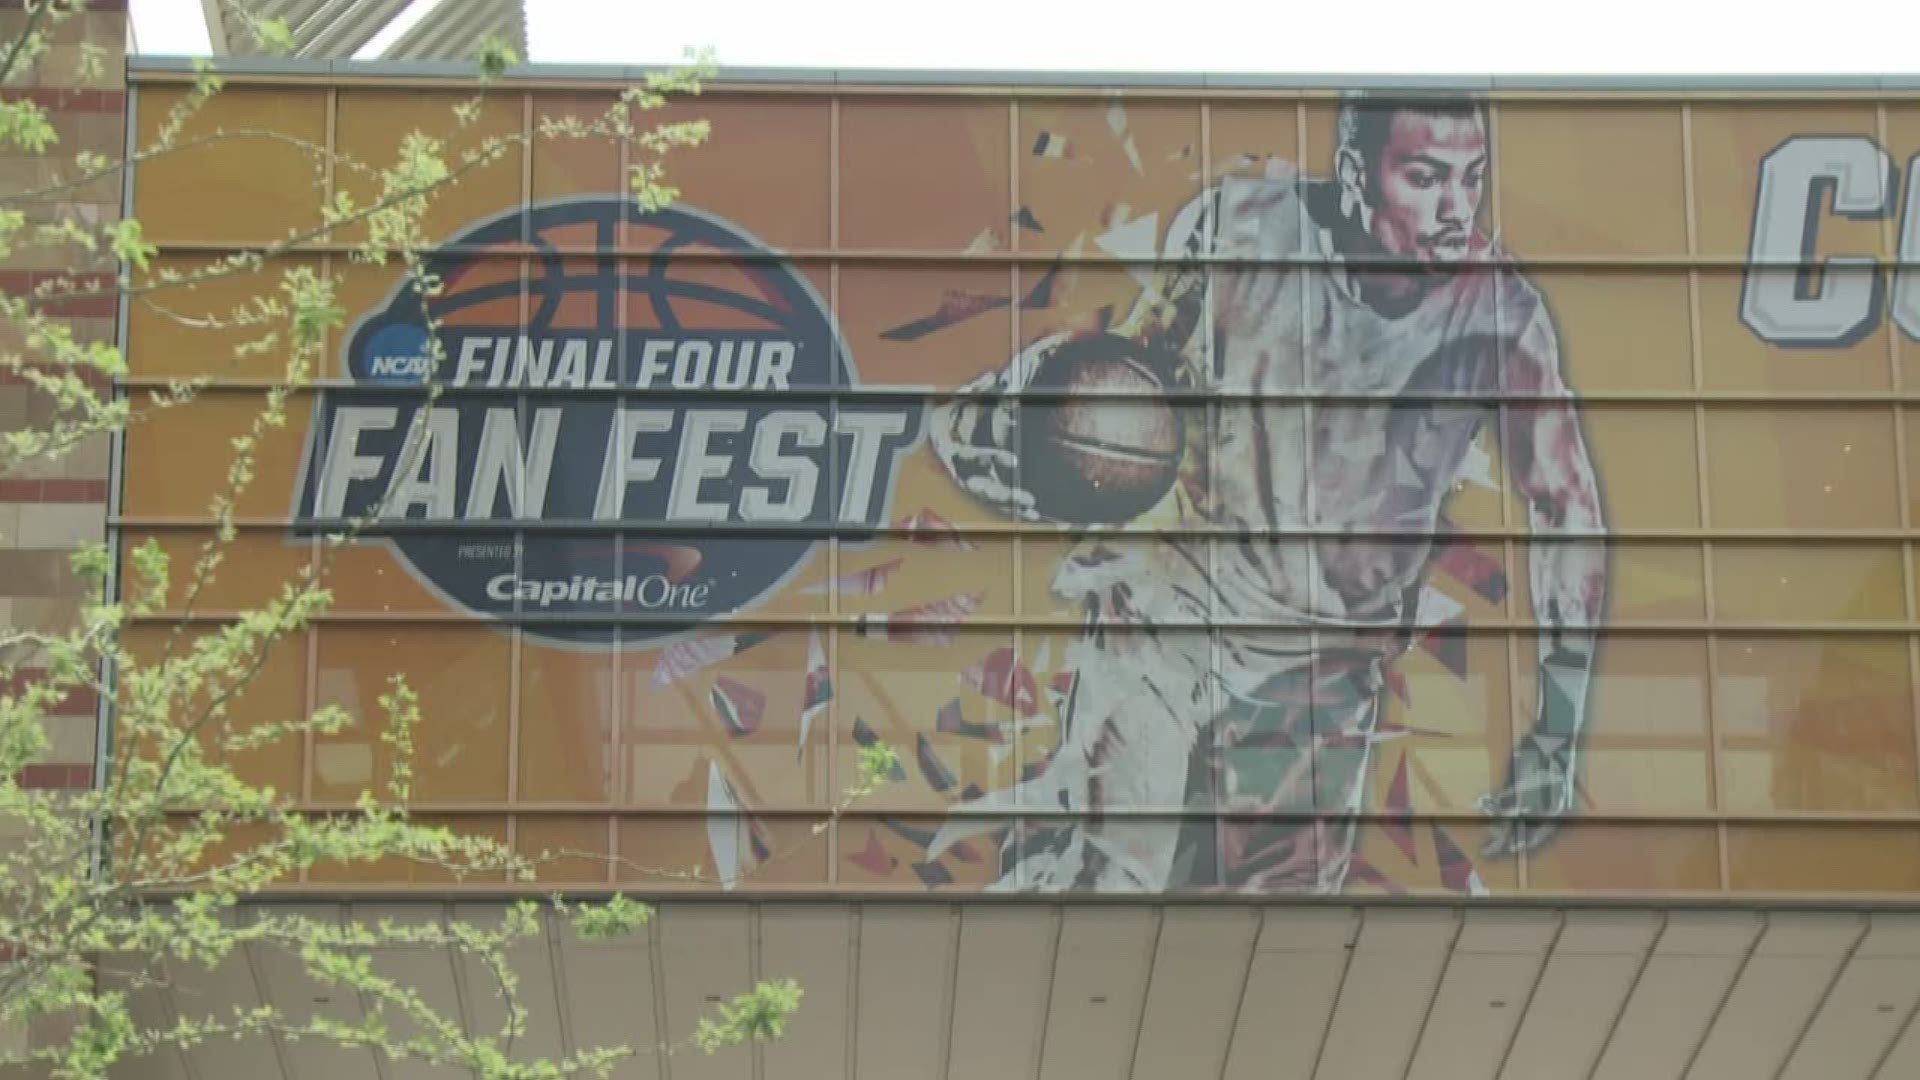 Strategize and plan to ensure your safety and fun at these Final Four fan fest events.